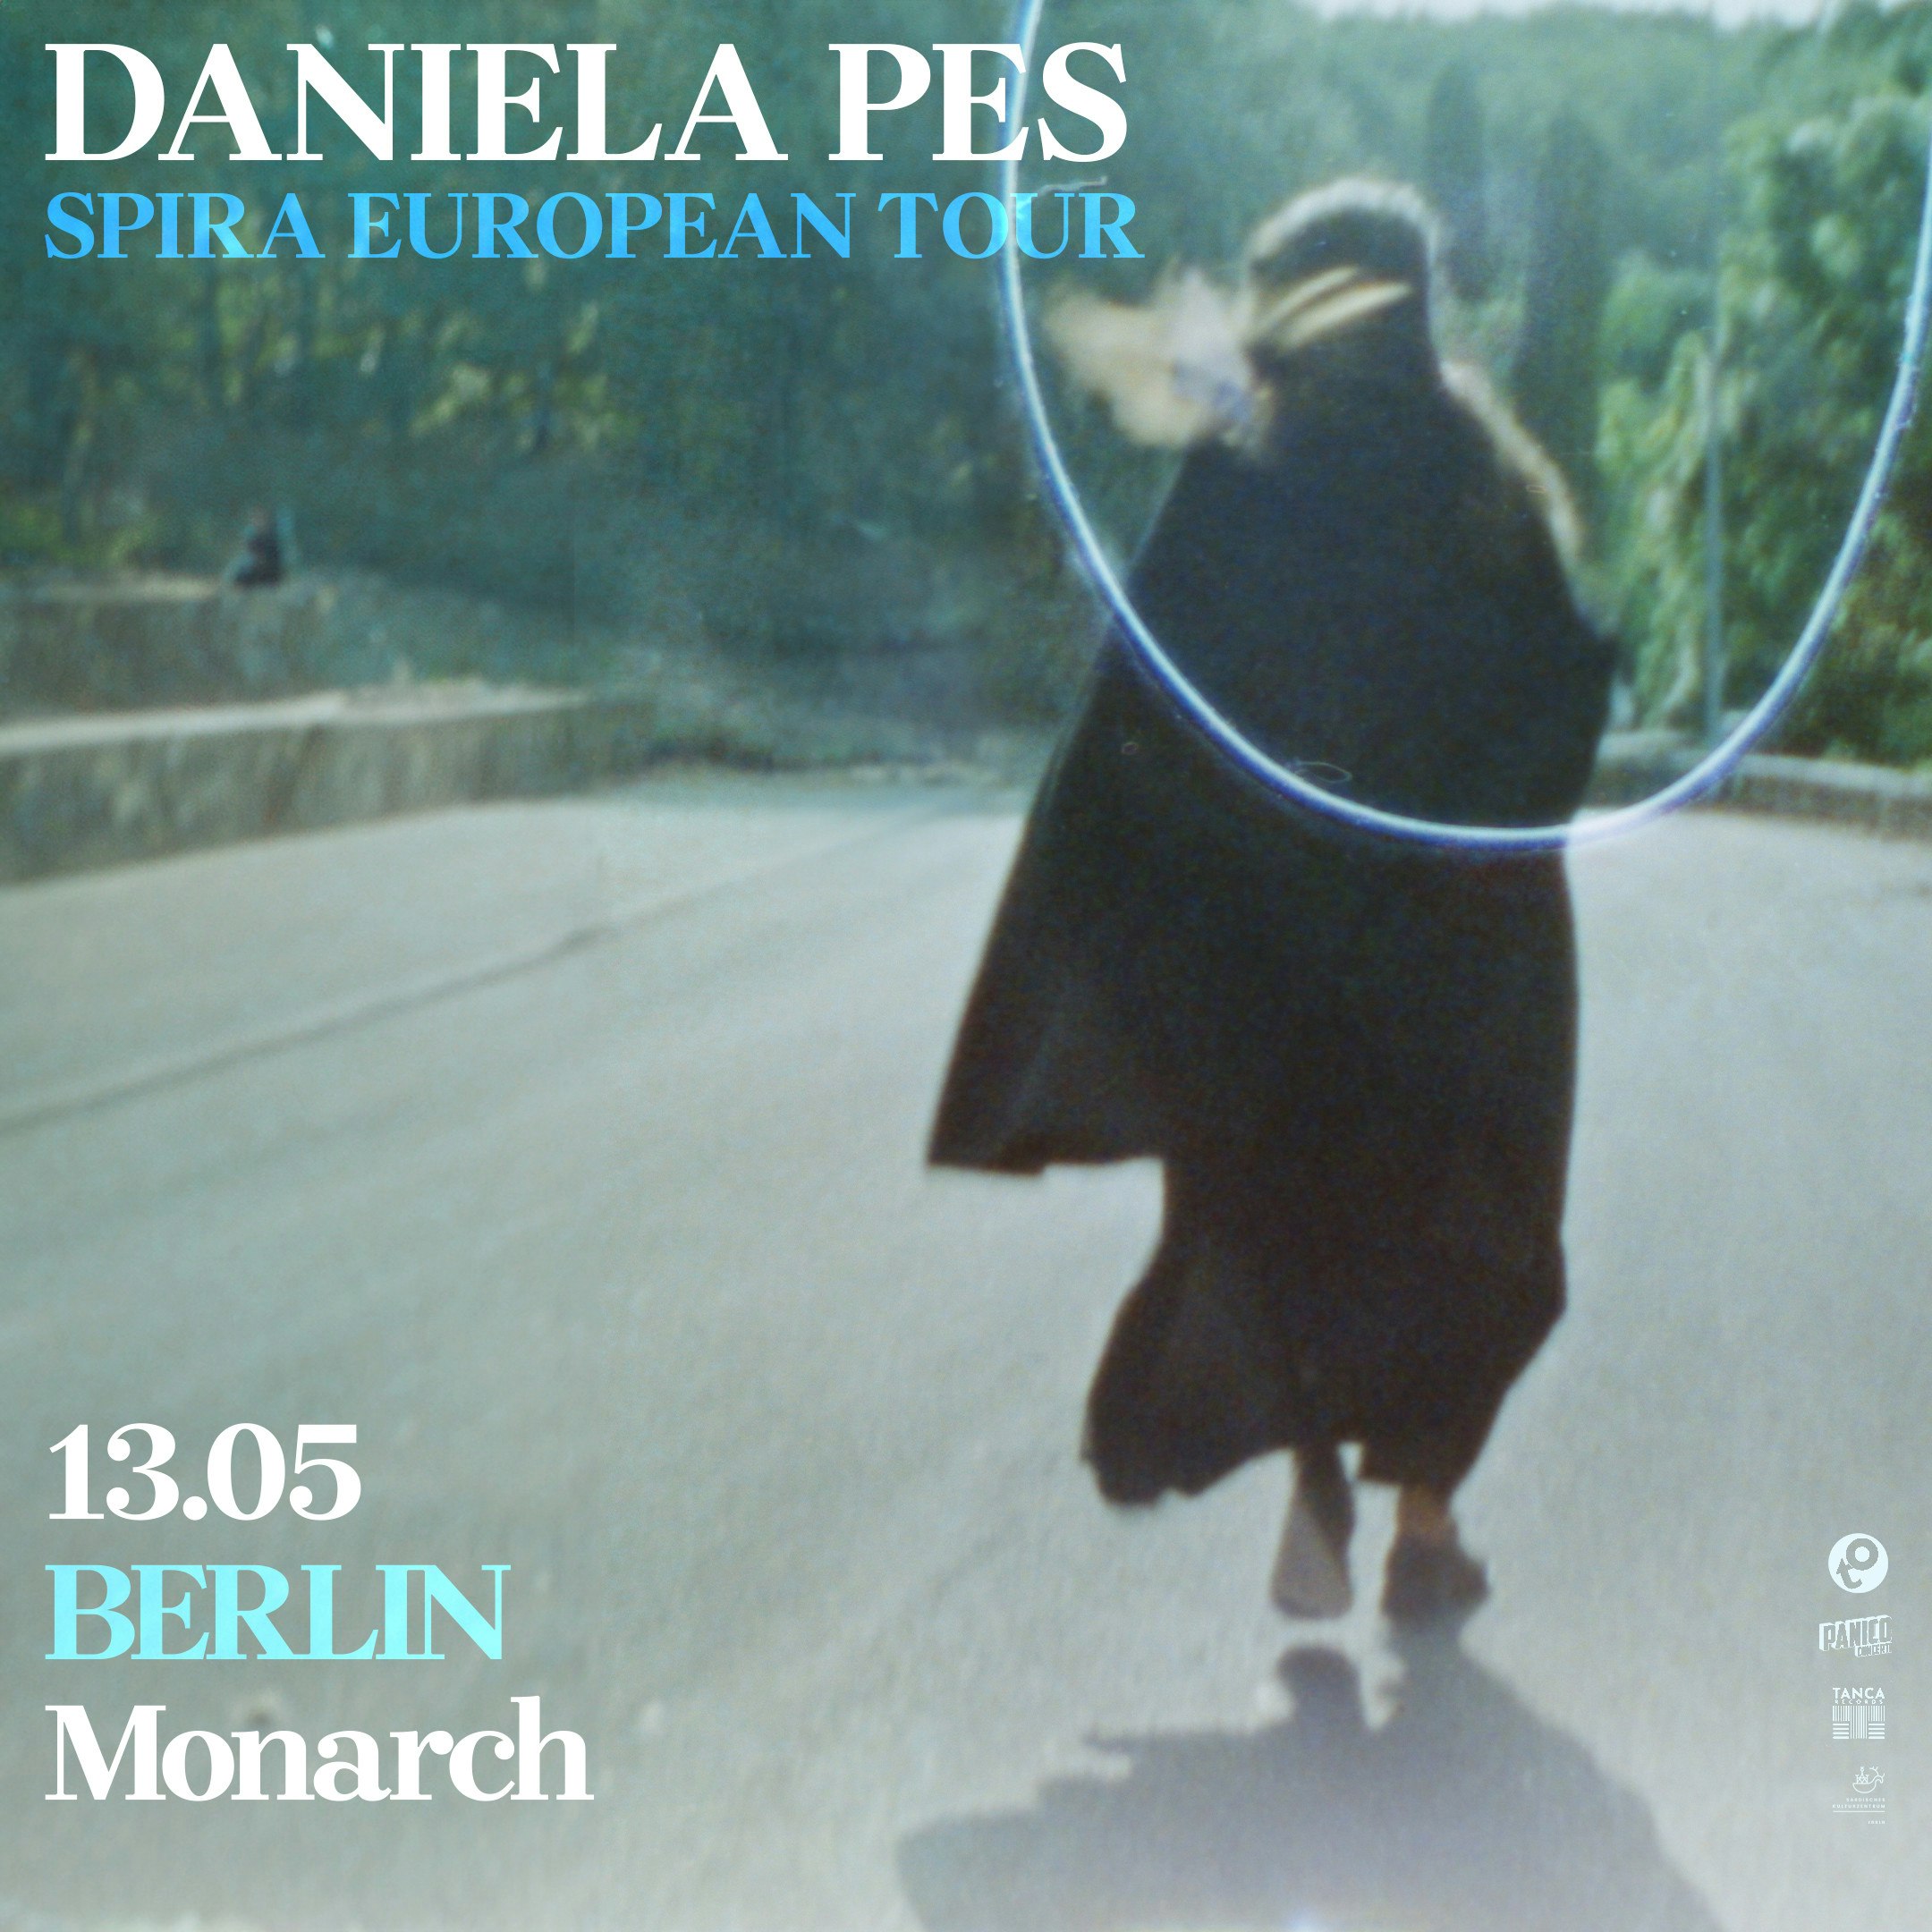 Daniela Pes Tickets, From €12.50, 13 May @ Monarch, Berlin